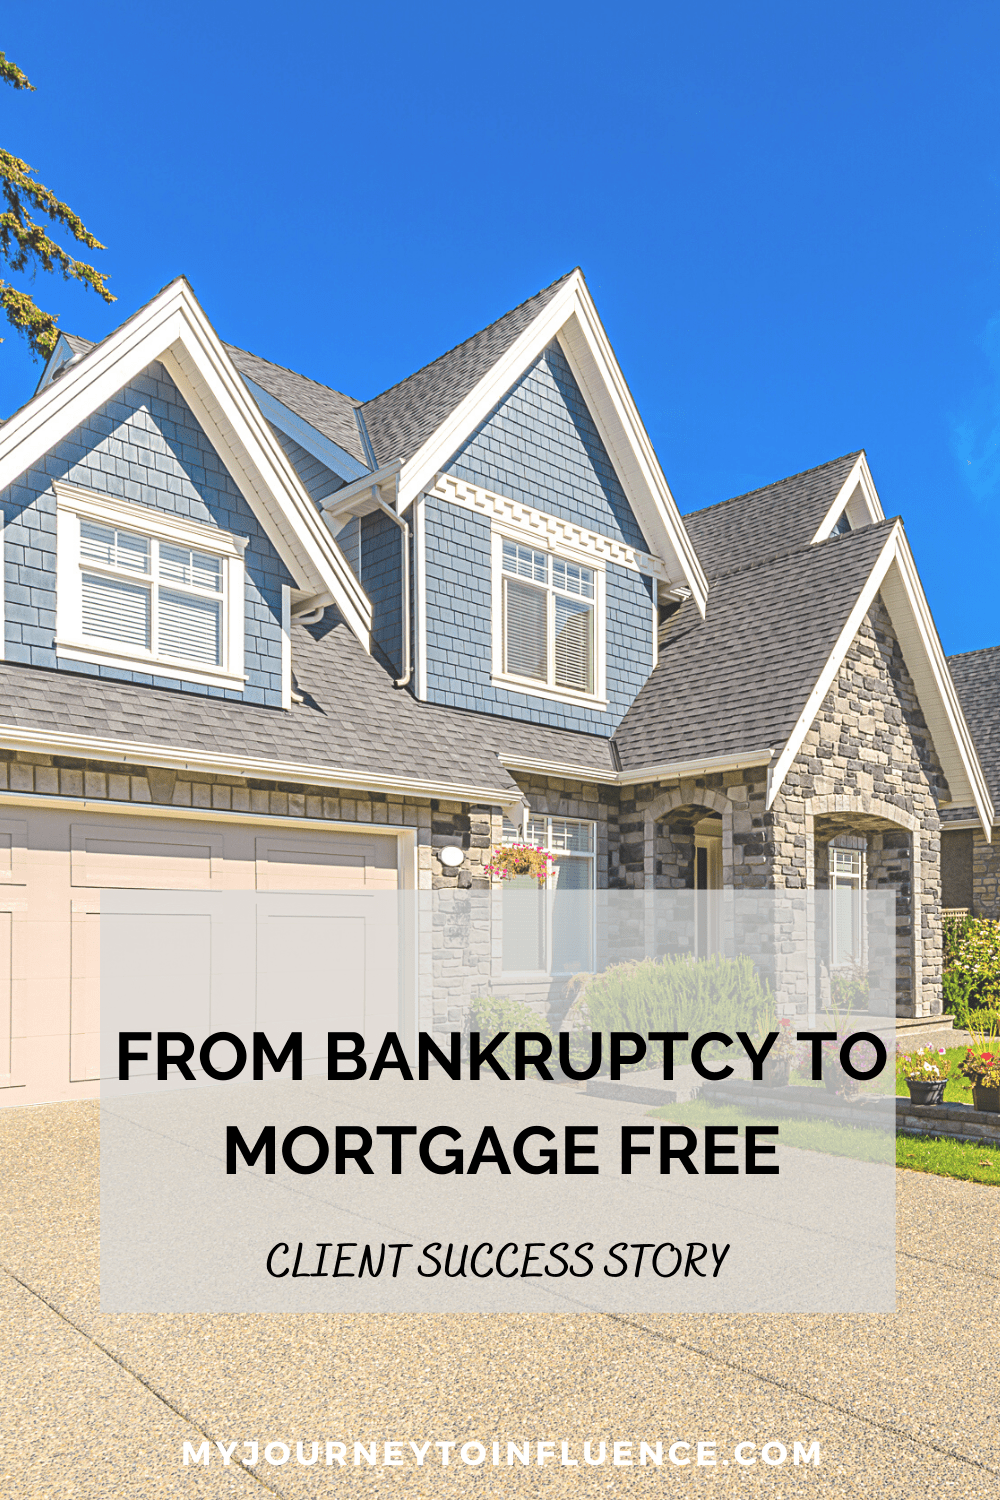 From bankruptcy to mortgage free: a client success story of a single mom who becomes intentional with her budget and changes her future.